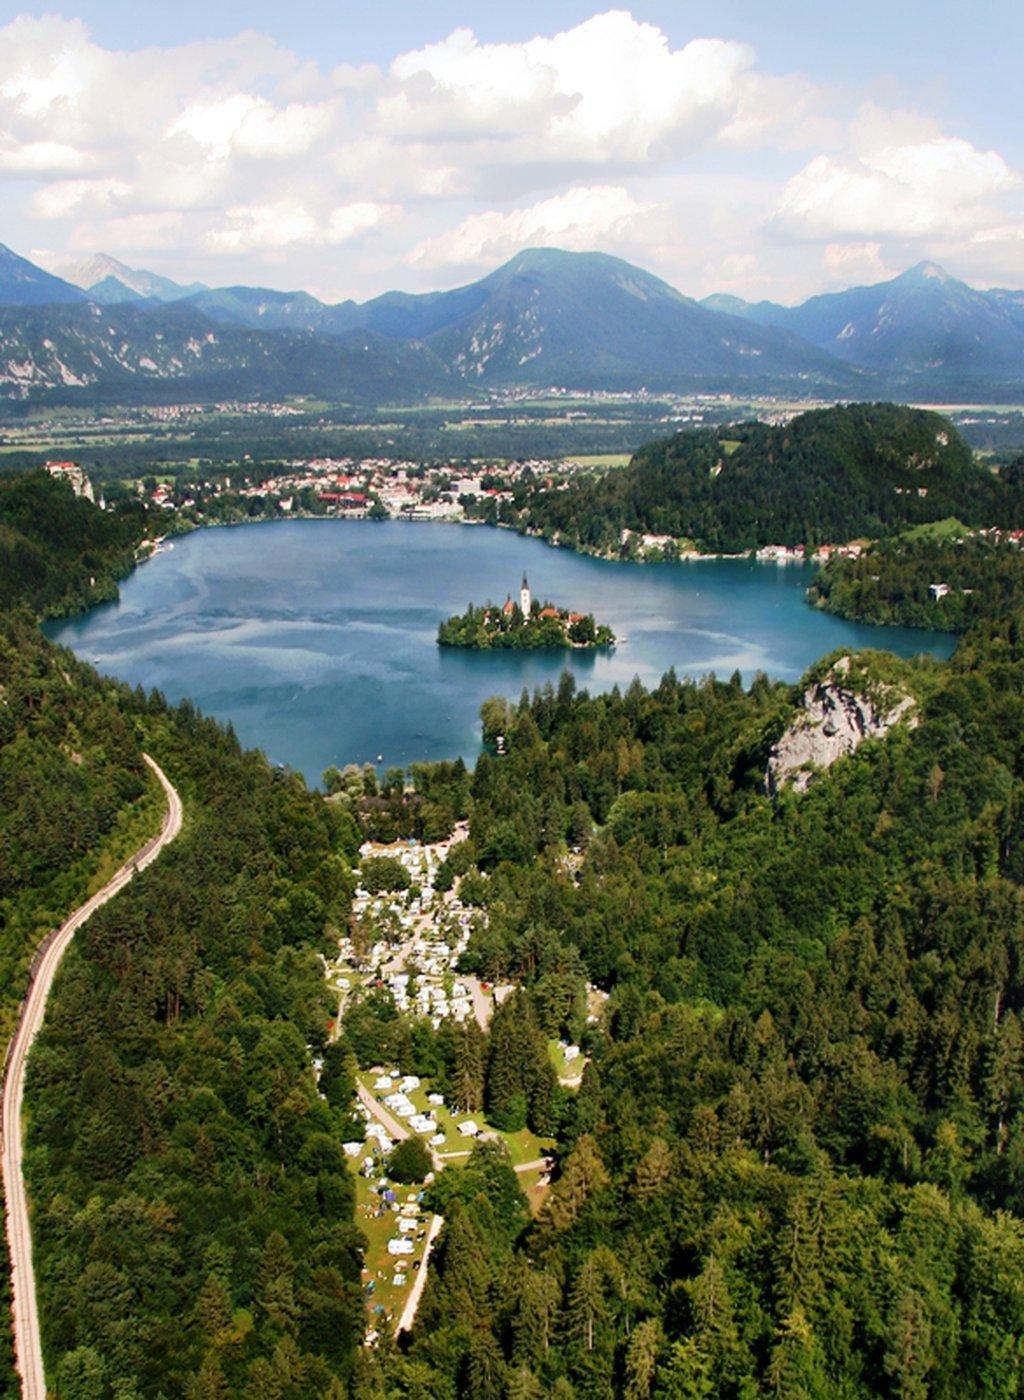 Holidays on the shores of Bled – image 3